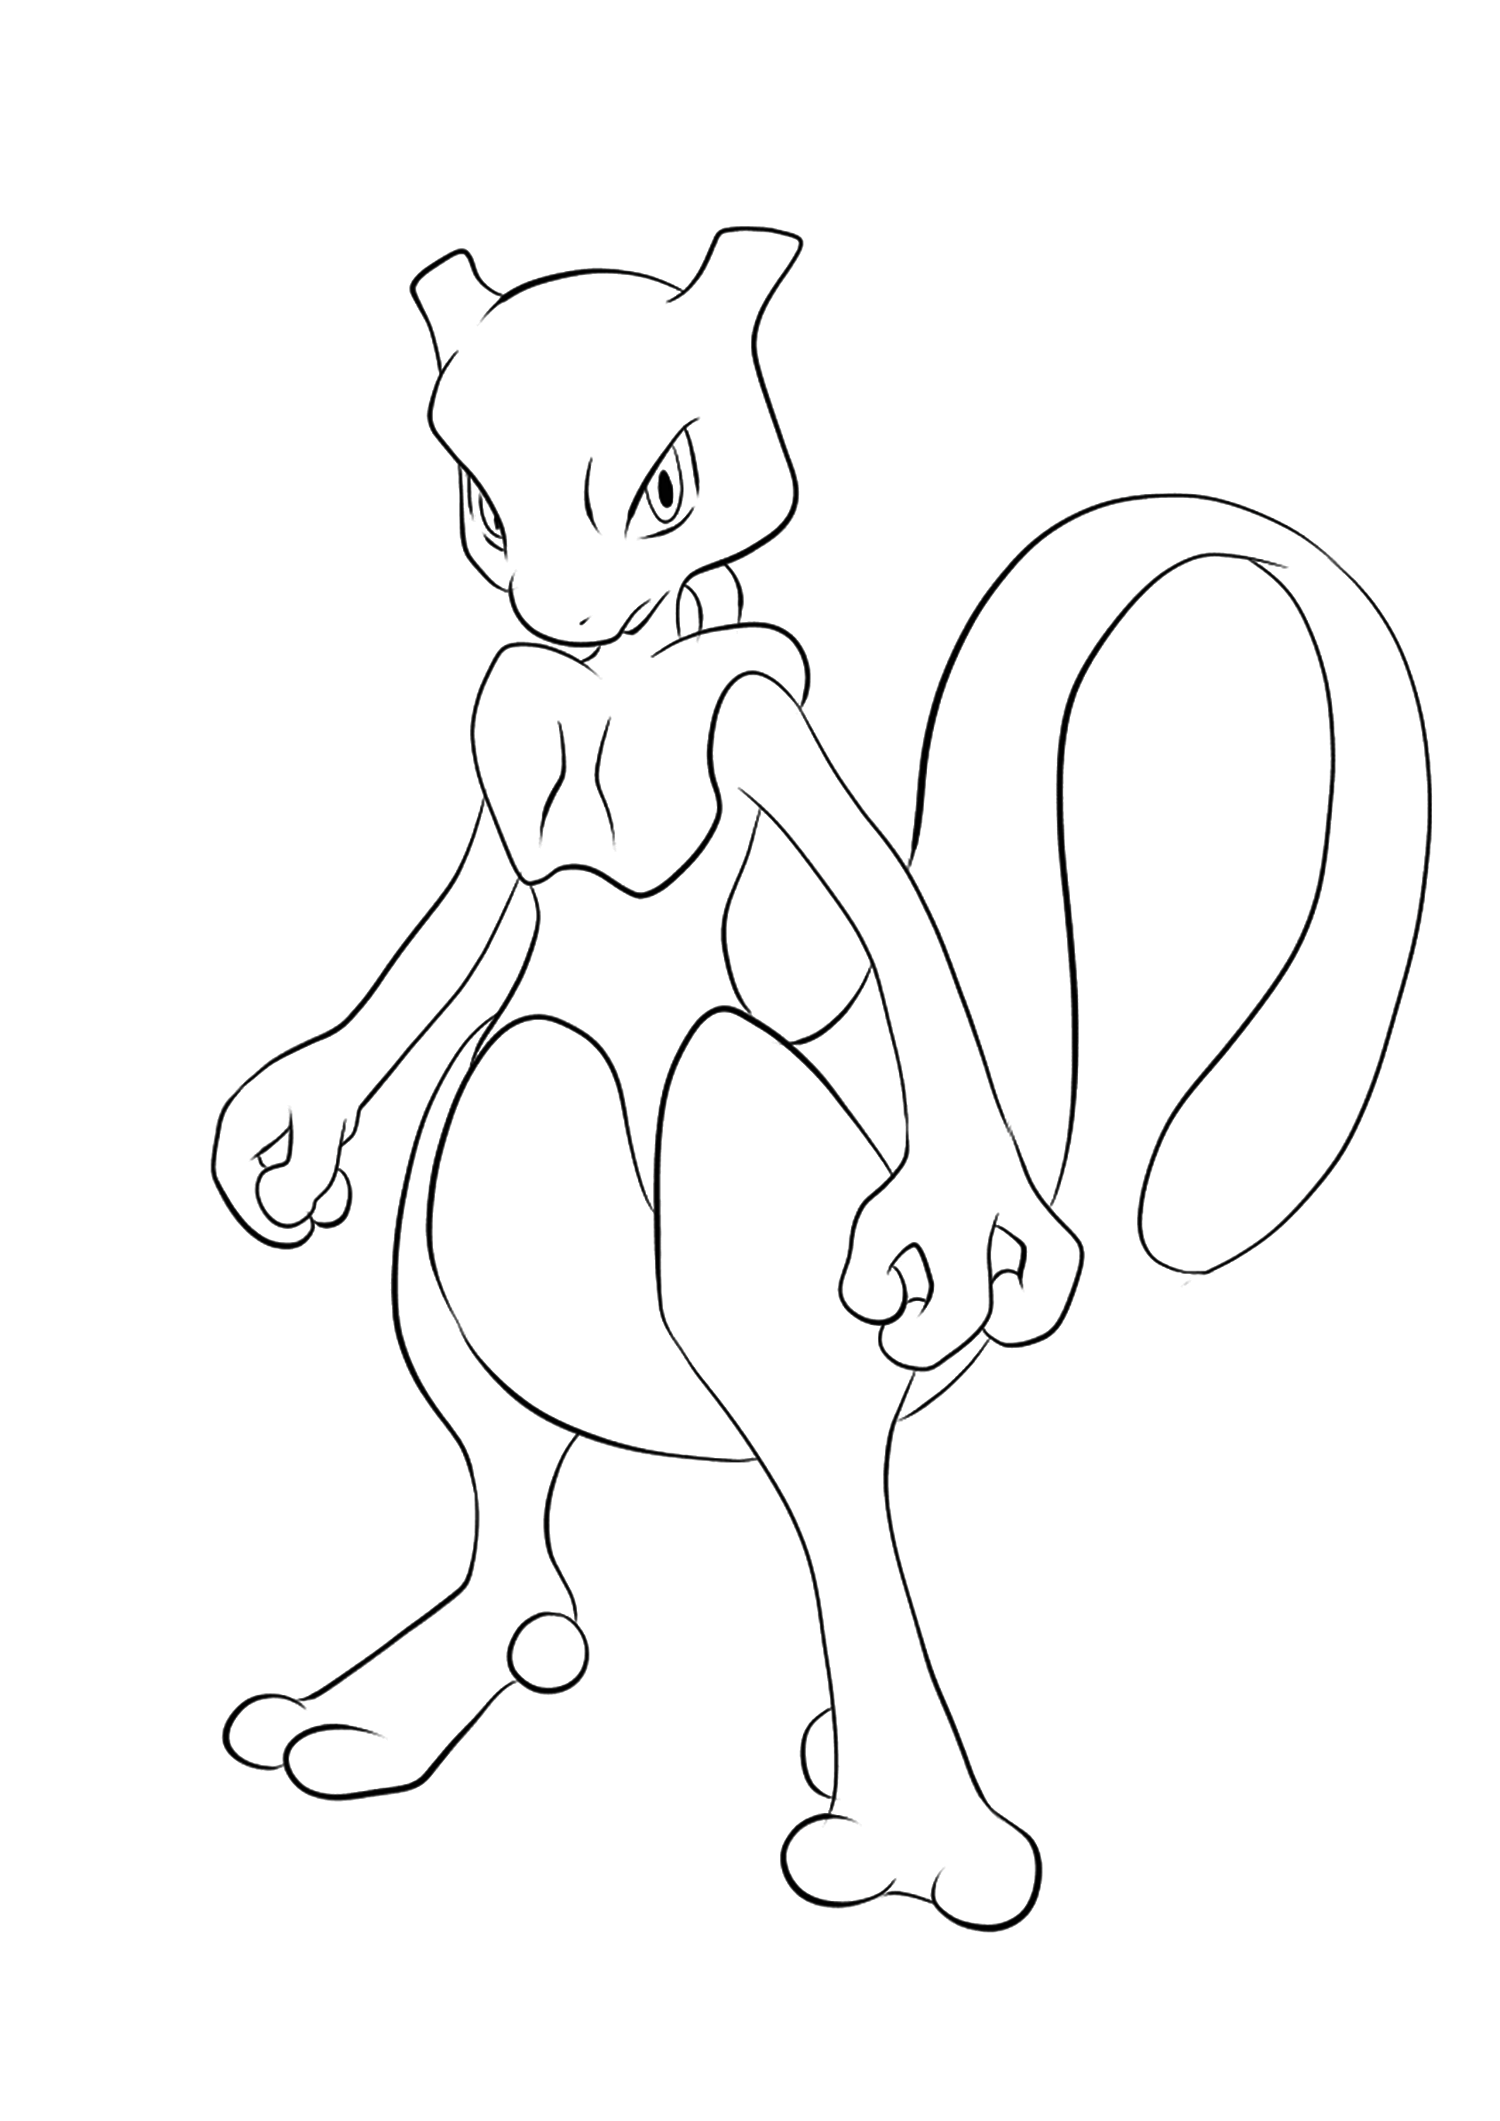 Mewtwo (No.150)Coloriage de Mewtwo (Mewtwo), Pokémon de Génération I, de type : PsyOriginal image credit: Pokemon linearts by Lilly Gerbil on Deviantart.Permission:  All rights reserved © Pokemon company and Ken Sugimori.